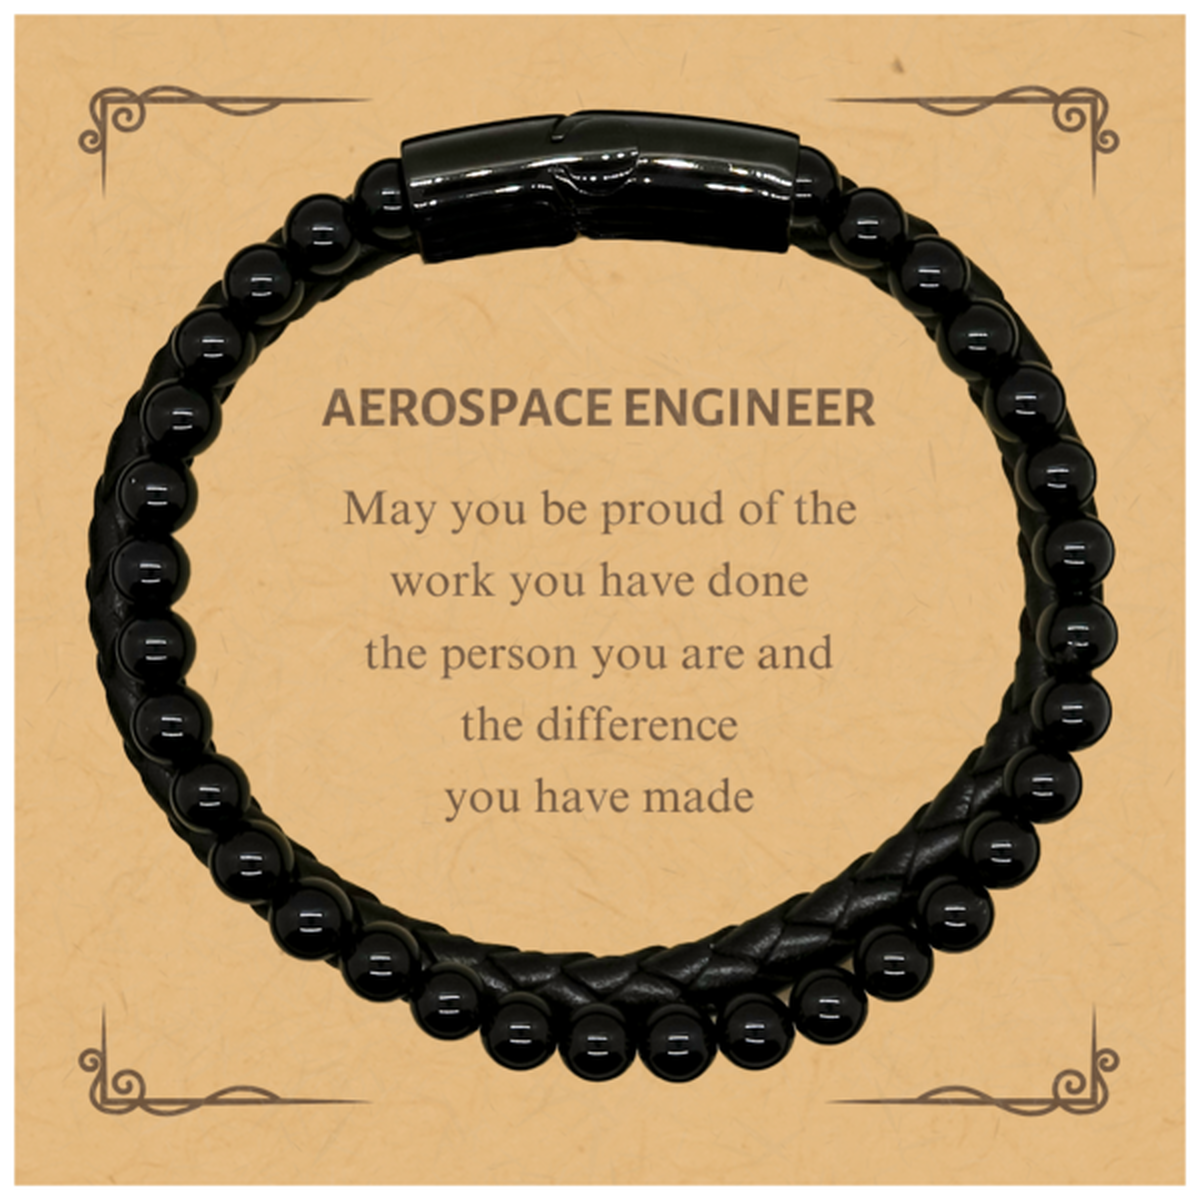 Aerospace Engineer May you be proud of the work you have done, Retirement Aerospace Engineer Stone Leather Bracelets for Colleague Appreciation Gifts Amazing for Aerospace Engineer